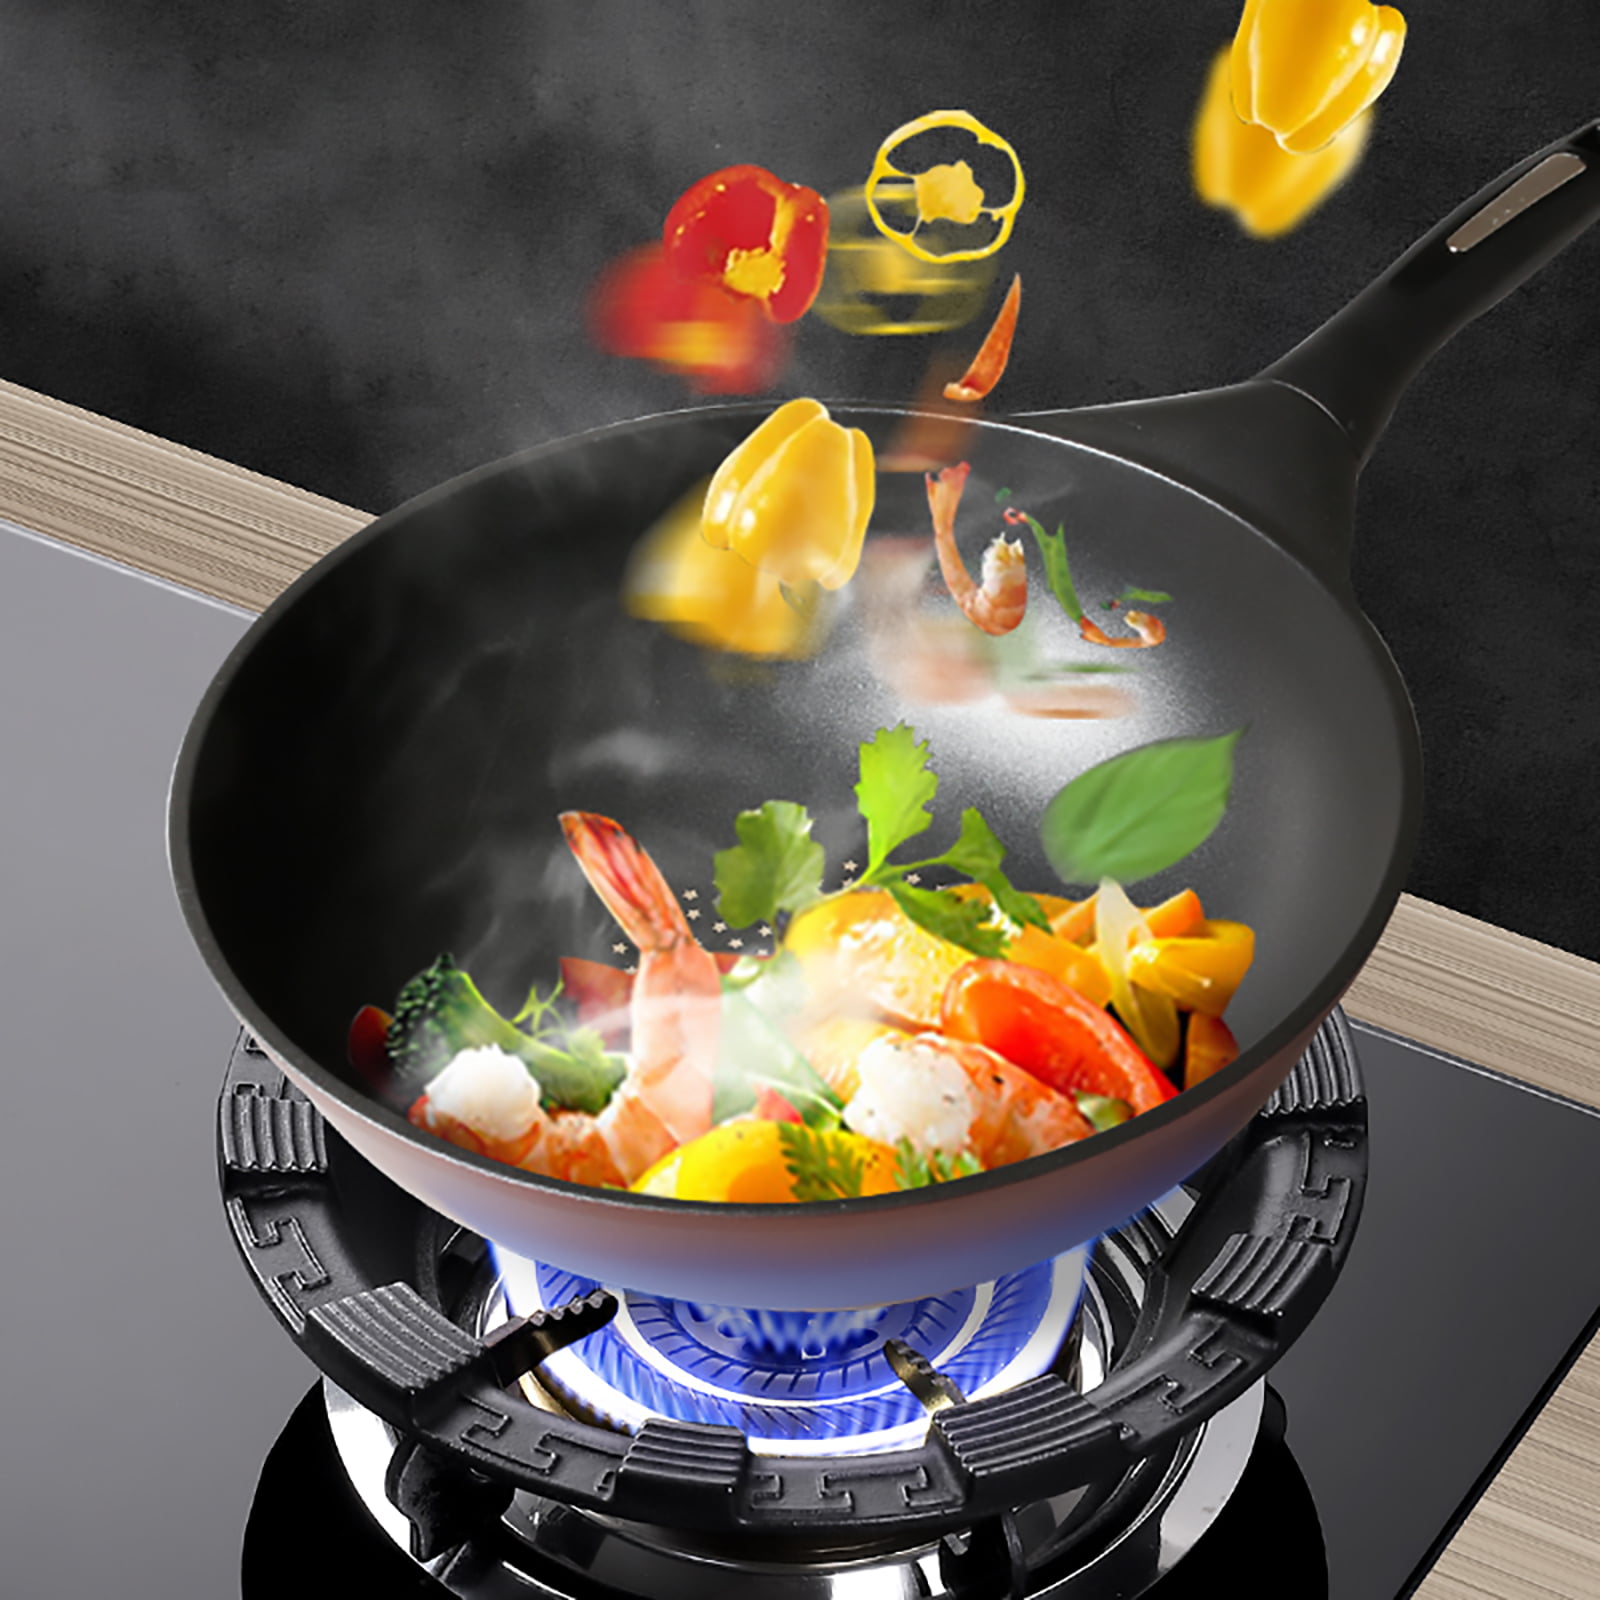 Star HP-WR Wok Ring 10 For Star-Max® Hotplates